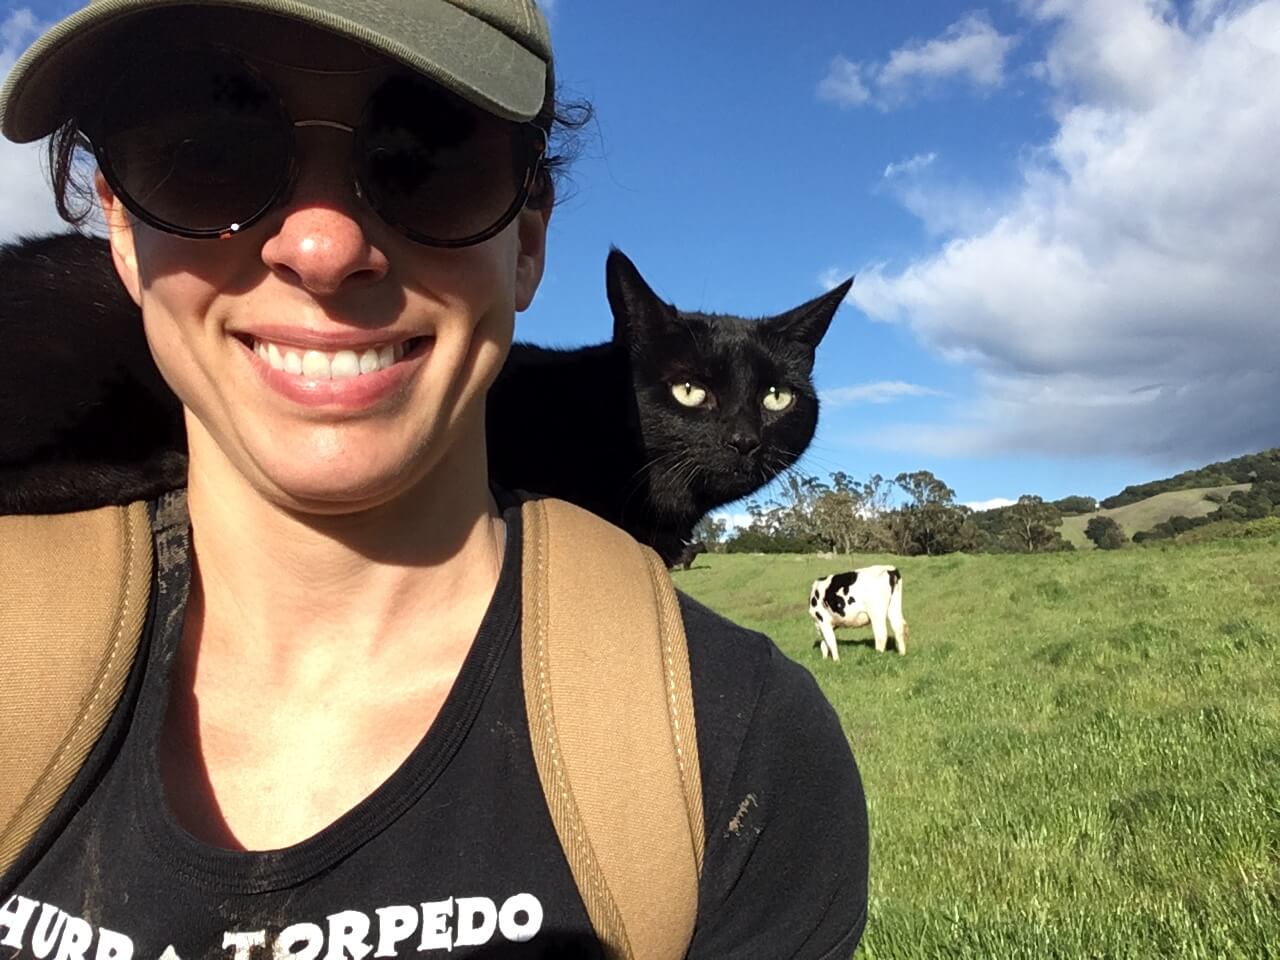 Guide Sarah on an adventure with her kitty cat